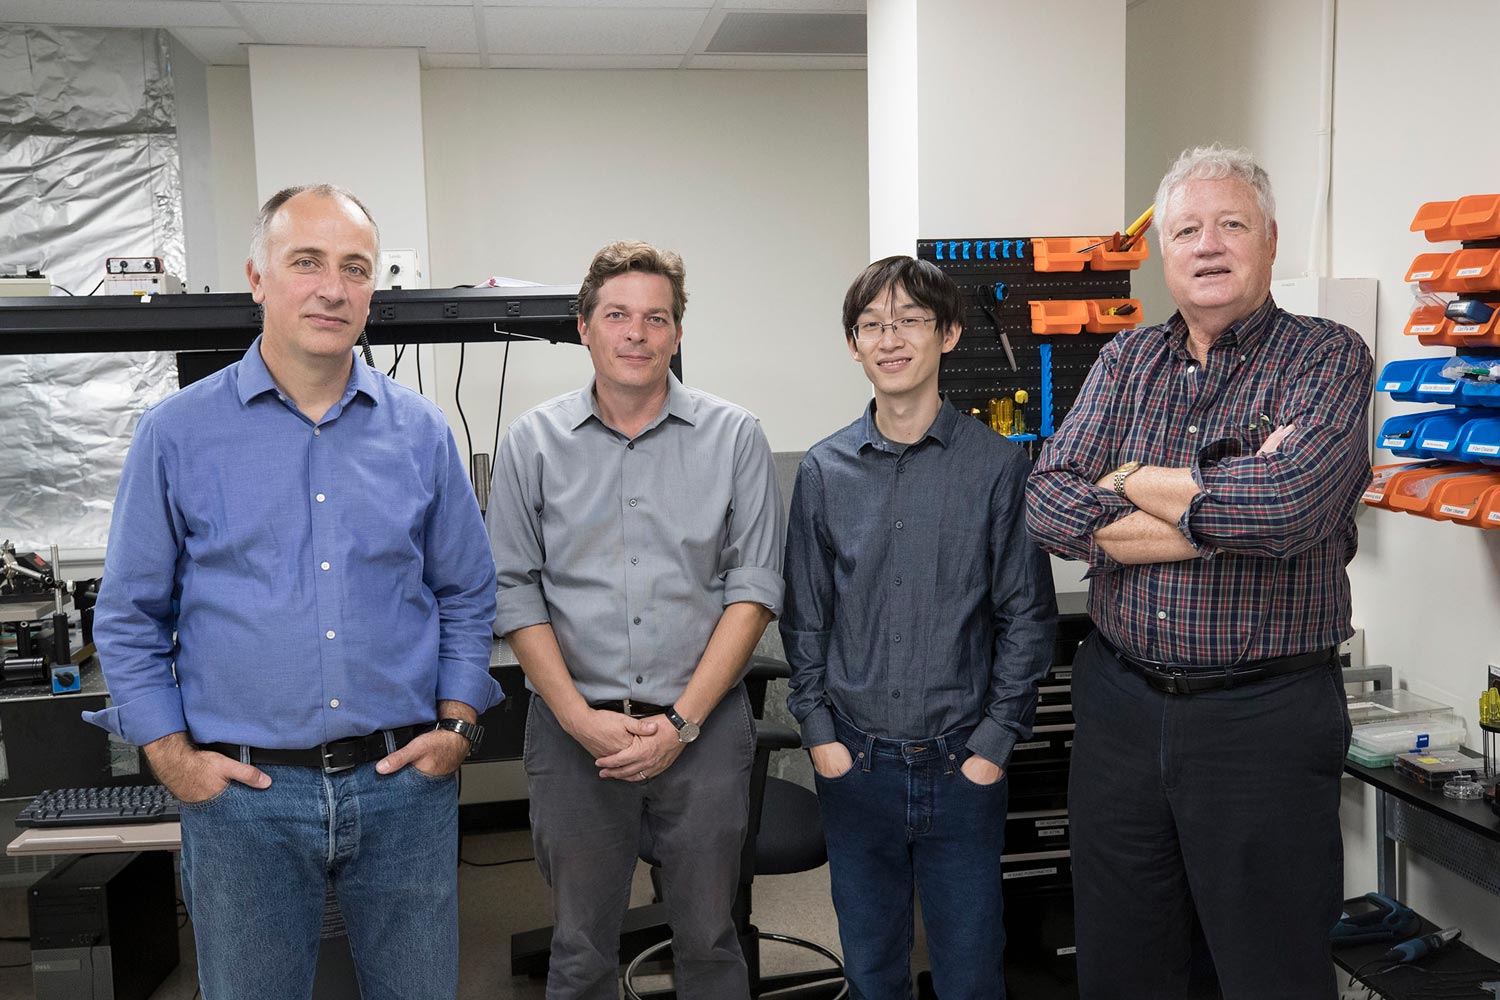 Left to right: Olivier Pfister, Andreas Beling, Xu Yi and Joe Campbell stand together for a picture